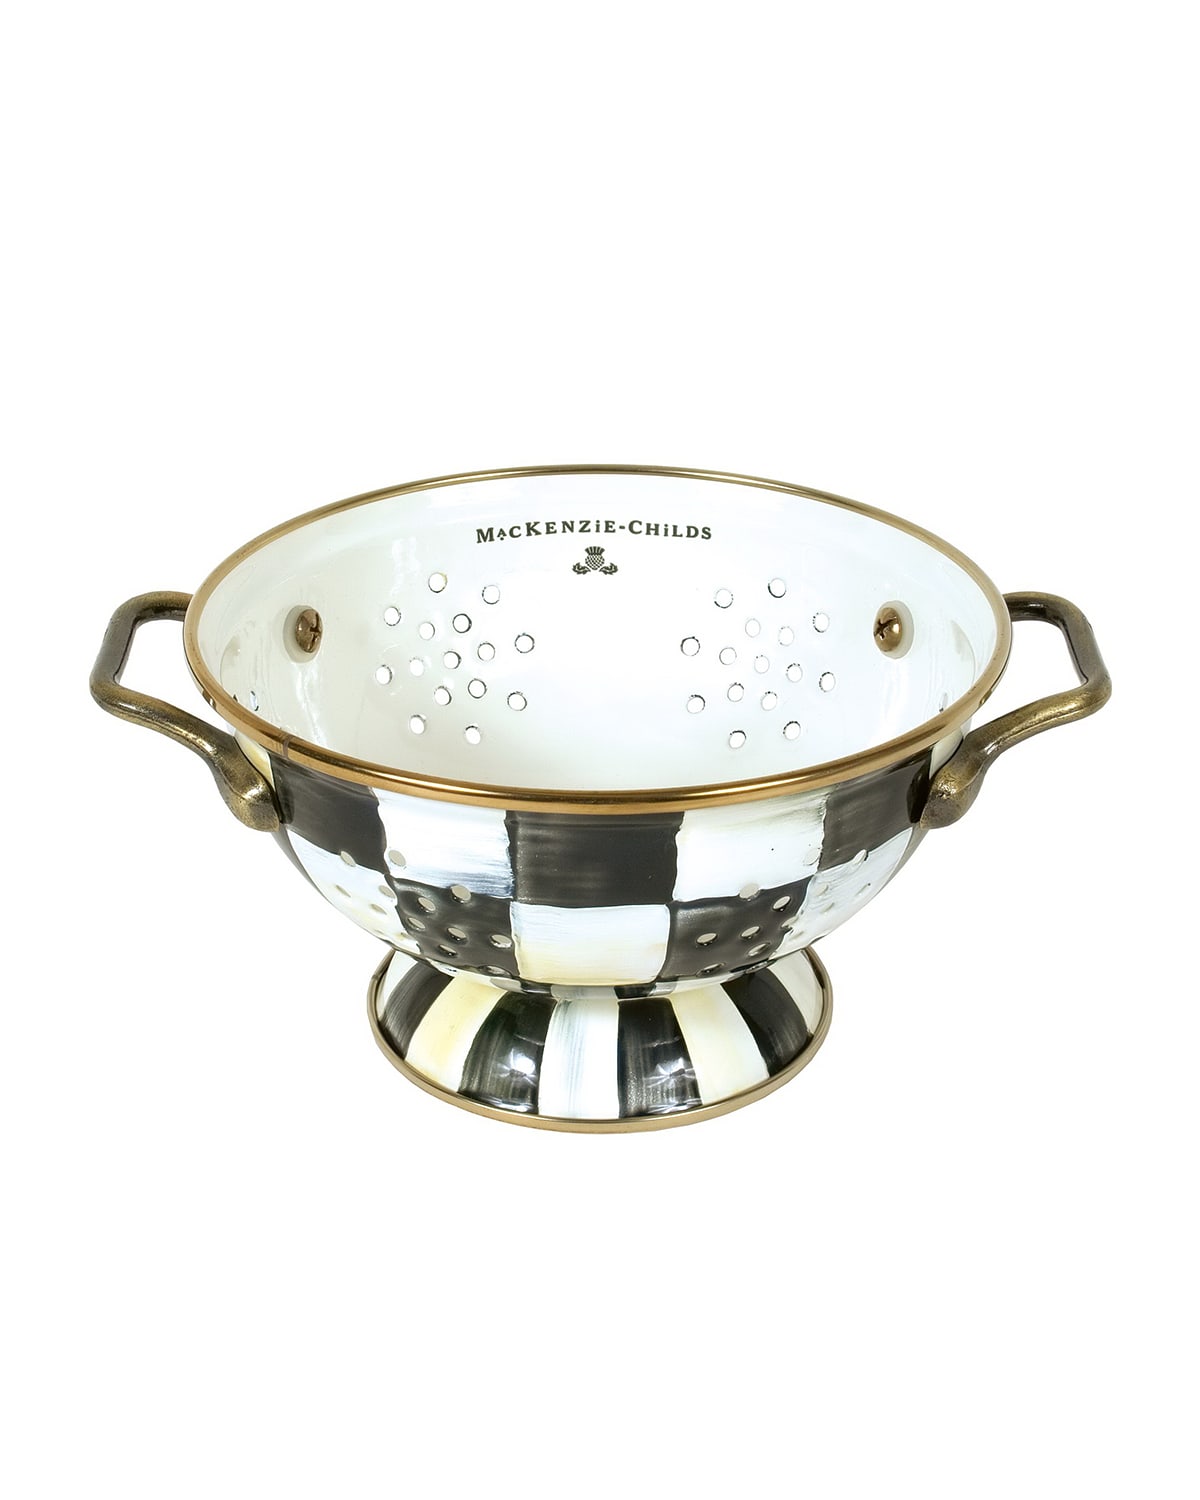 Mackenzie-childs Courtly Check Small Colander